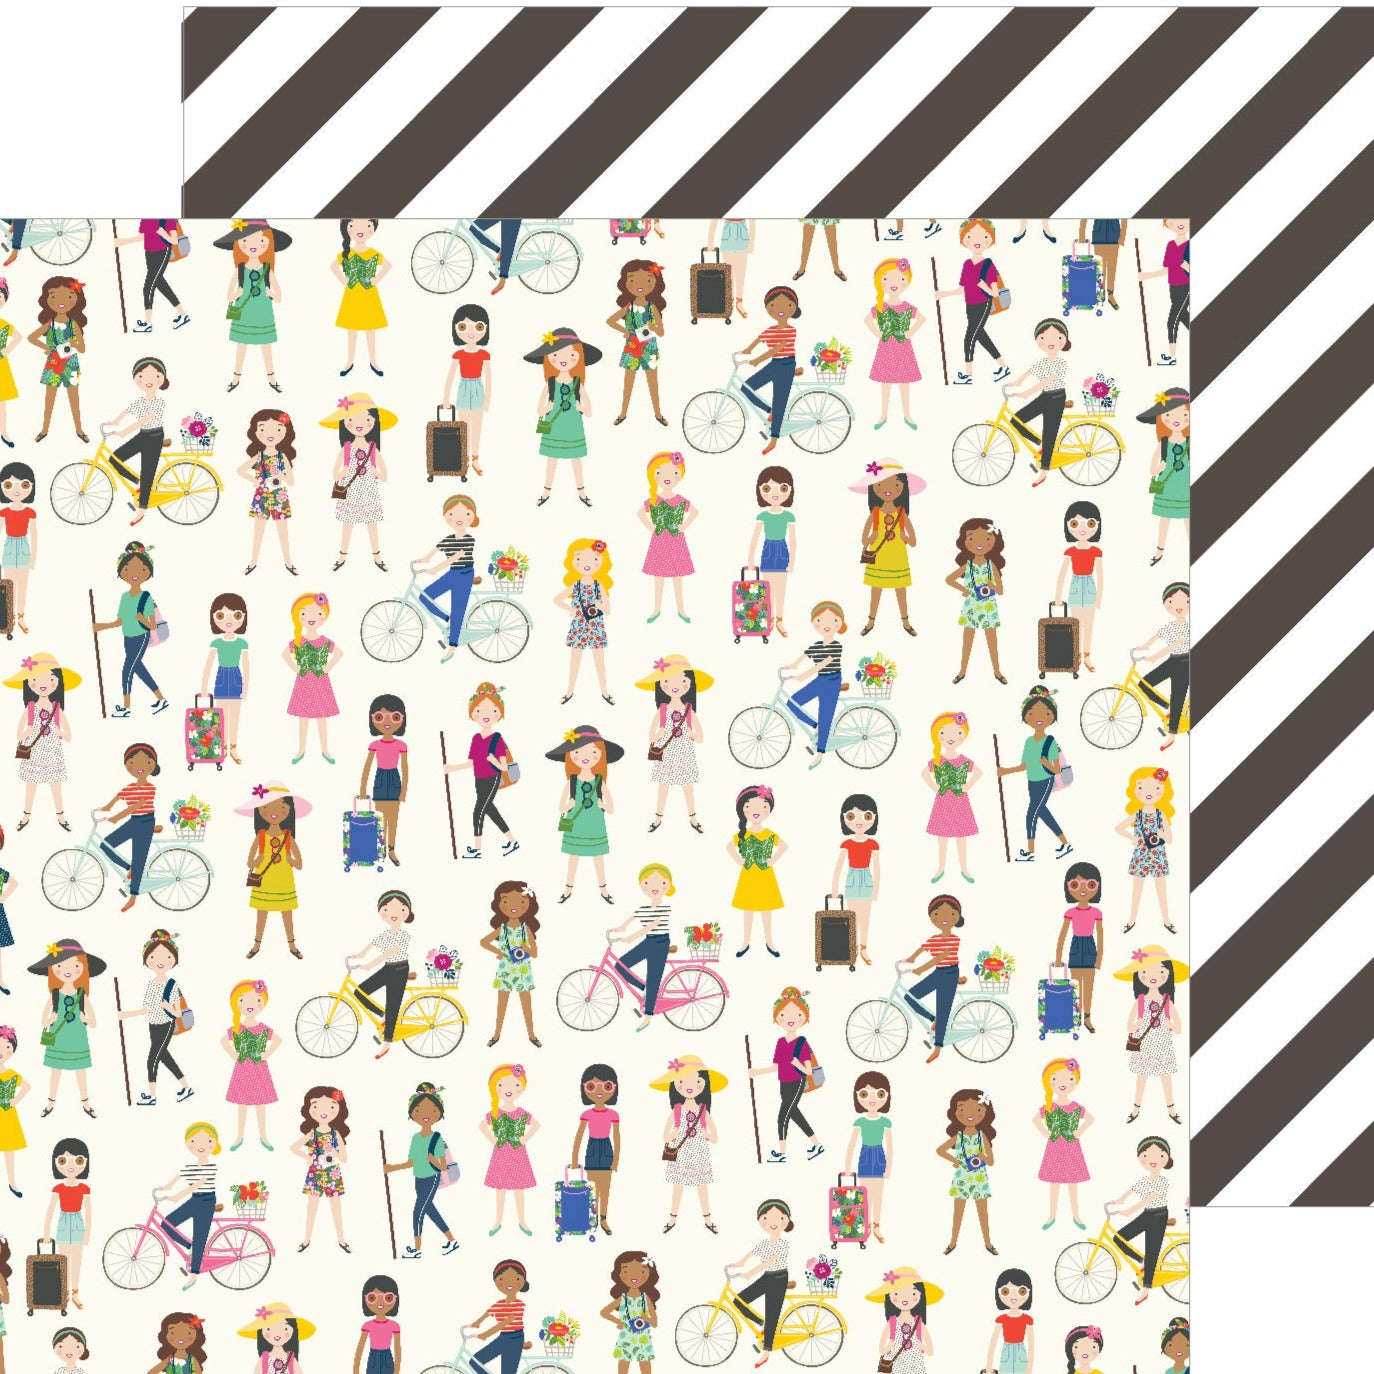 Multi-Colored (Side A - includes images such as flowers, cityscapes, girls hiking or riding bikes, and more on a cream background, Side B - wide black and white diagonal stripes)